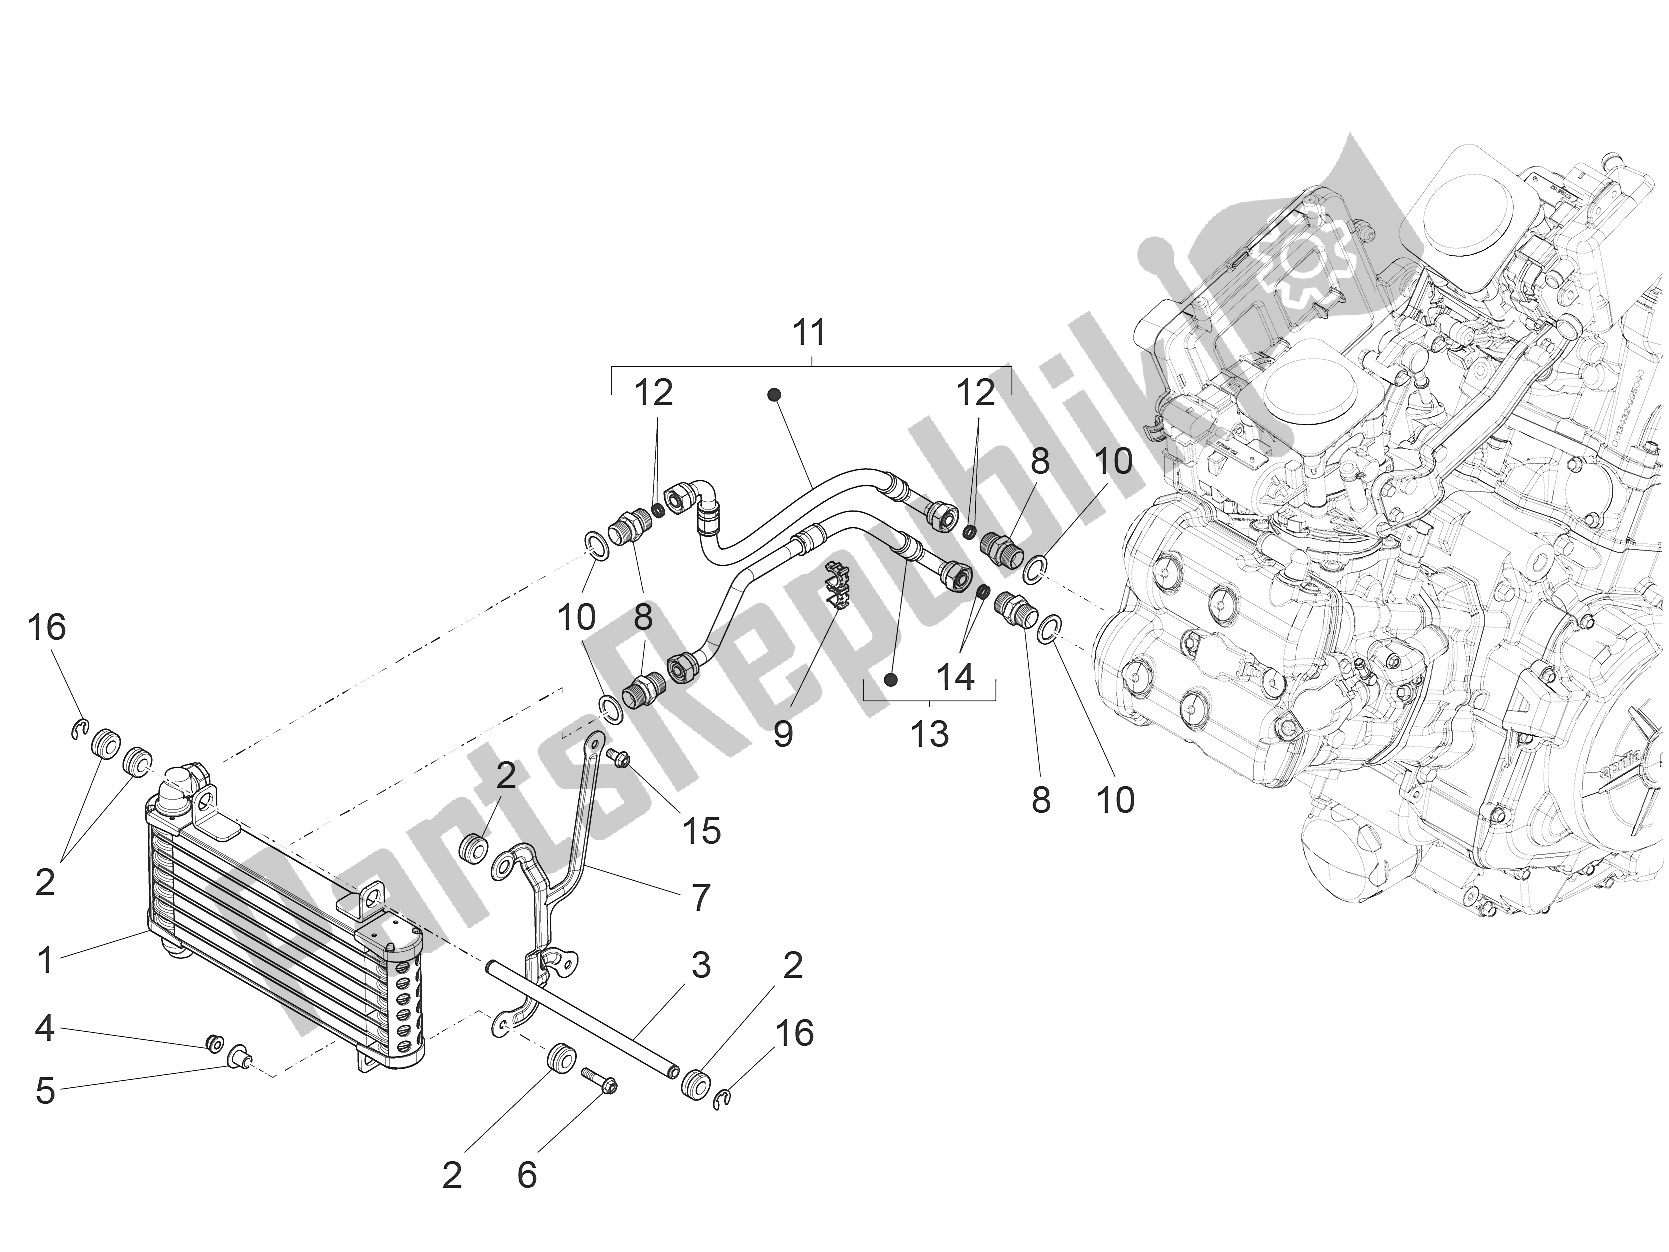 All parts for the Oil Radiator of the Aprilia Caponord 1200 USA 2015